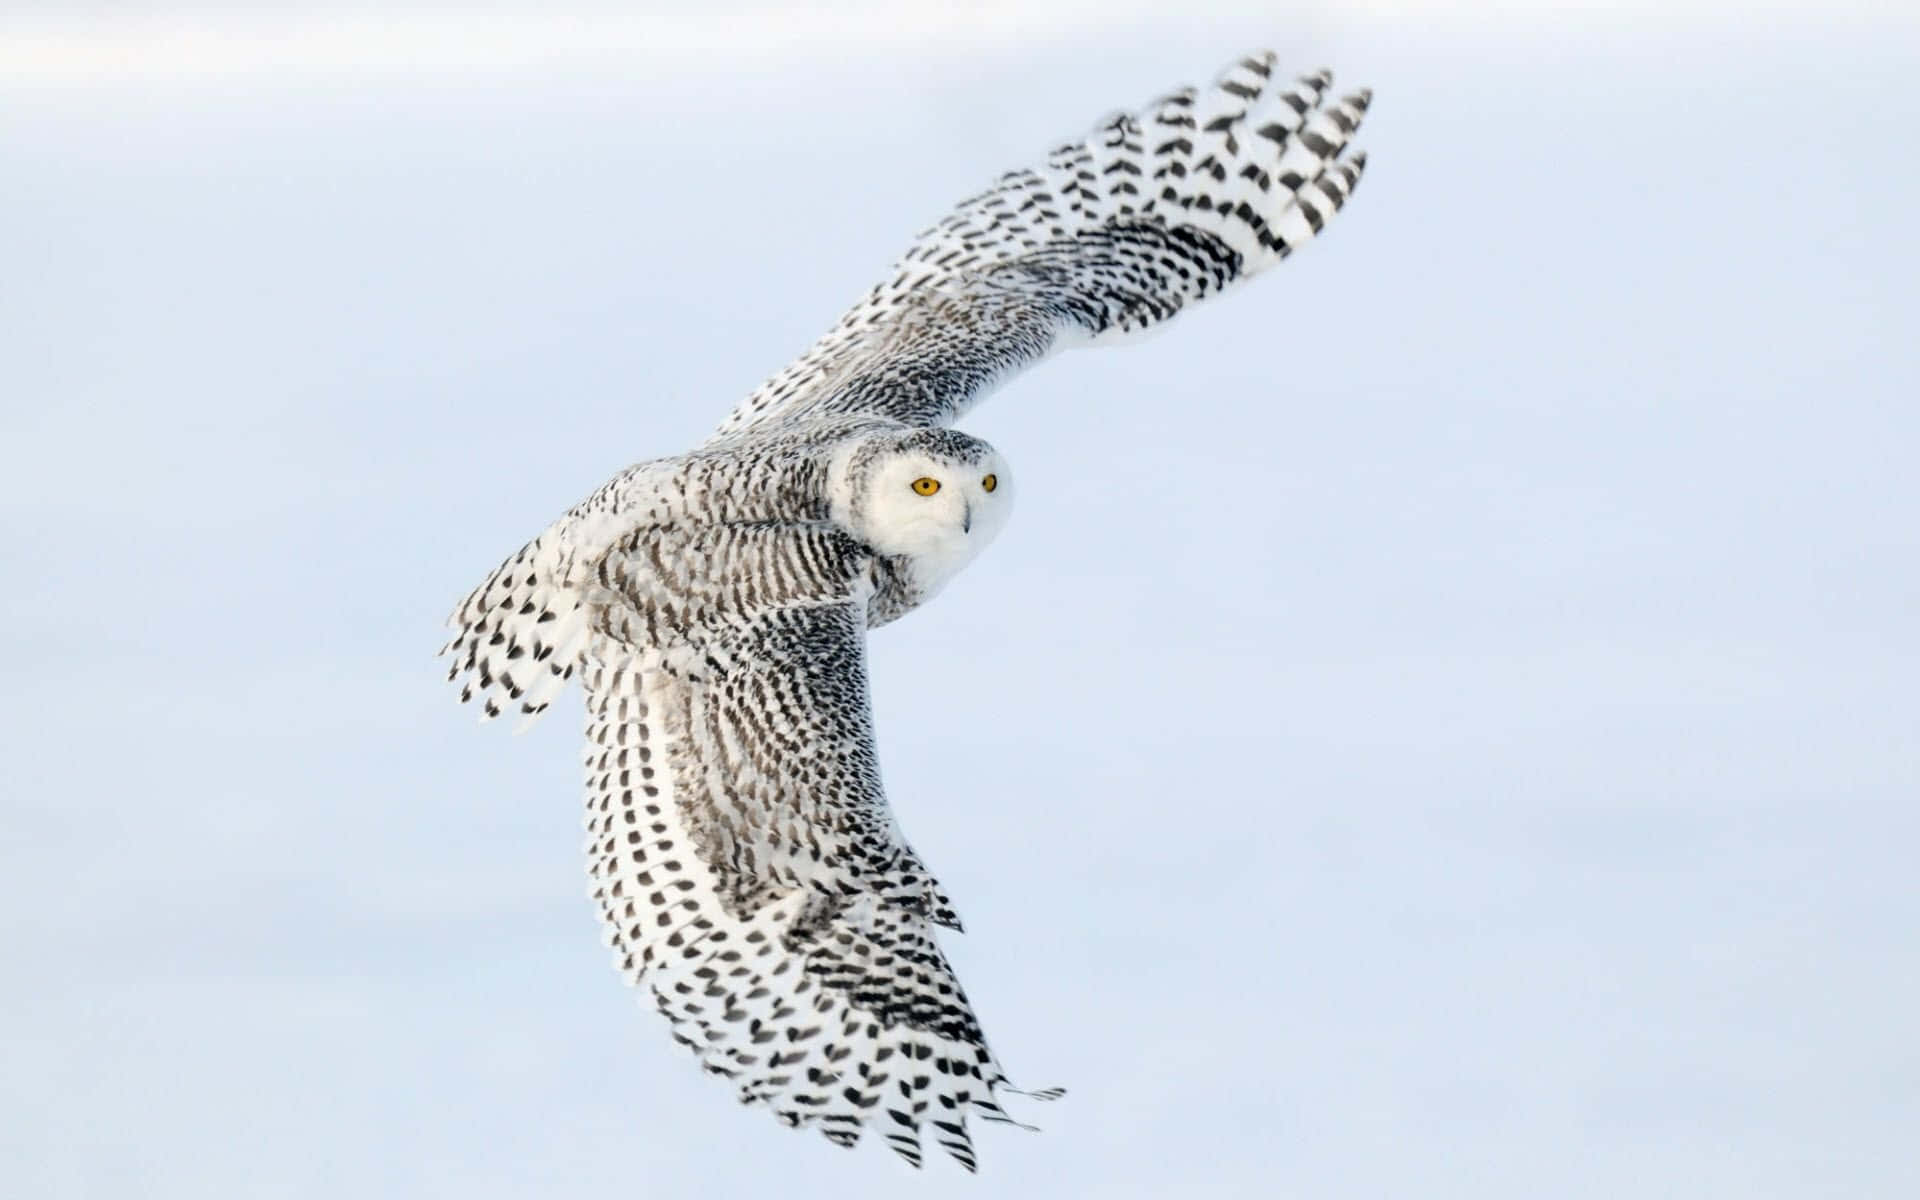 Captivating Snowy Owl Perched in Winter Landscape Wallpaper